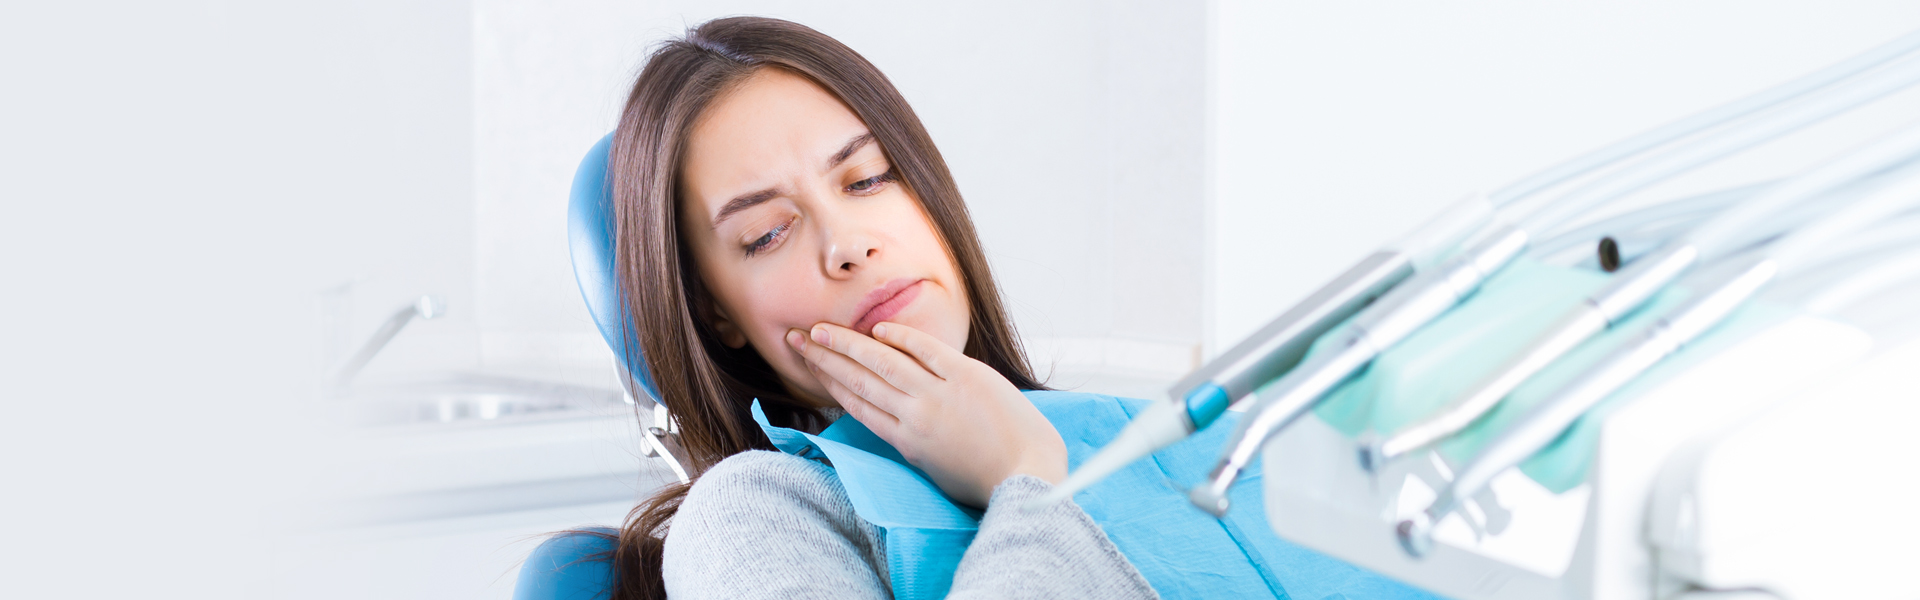 Emergency Dentistry: Here’s What You Need to Know About It